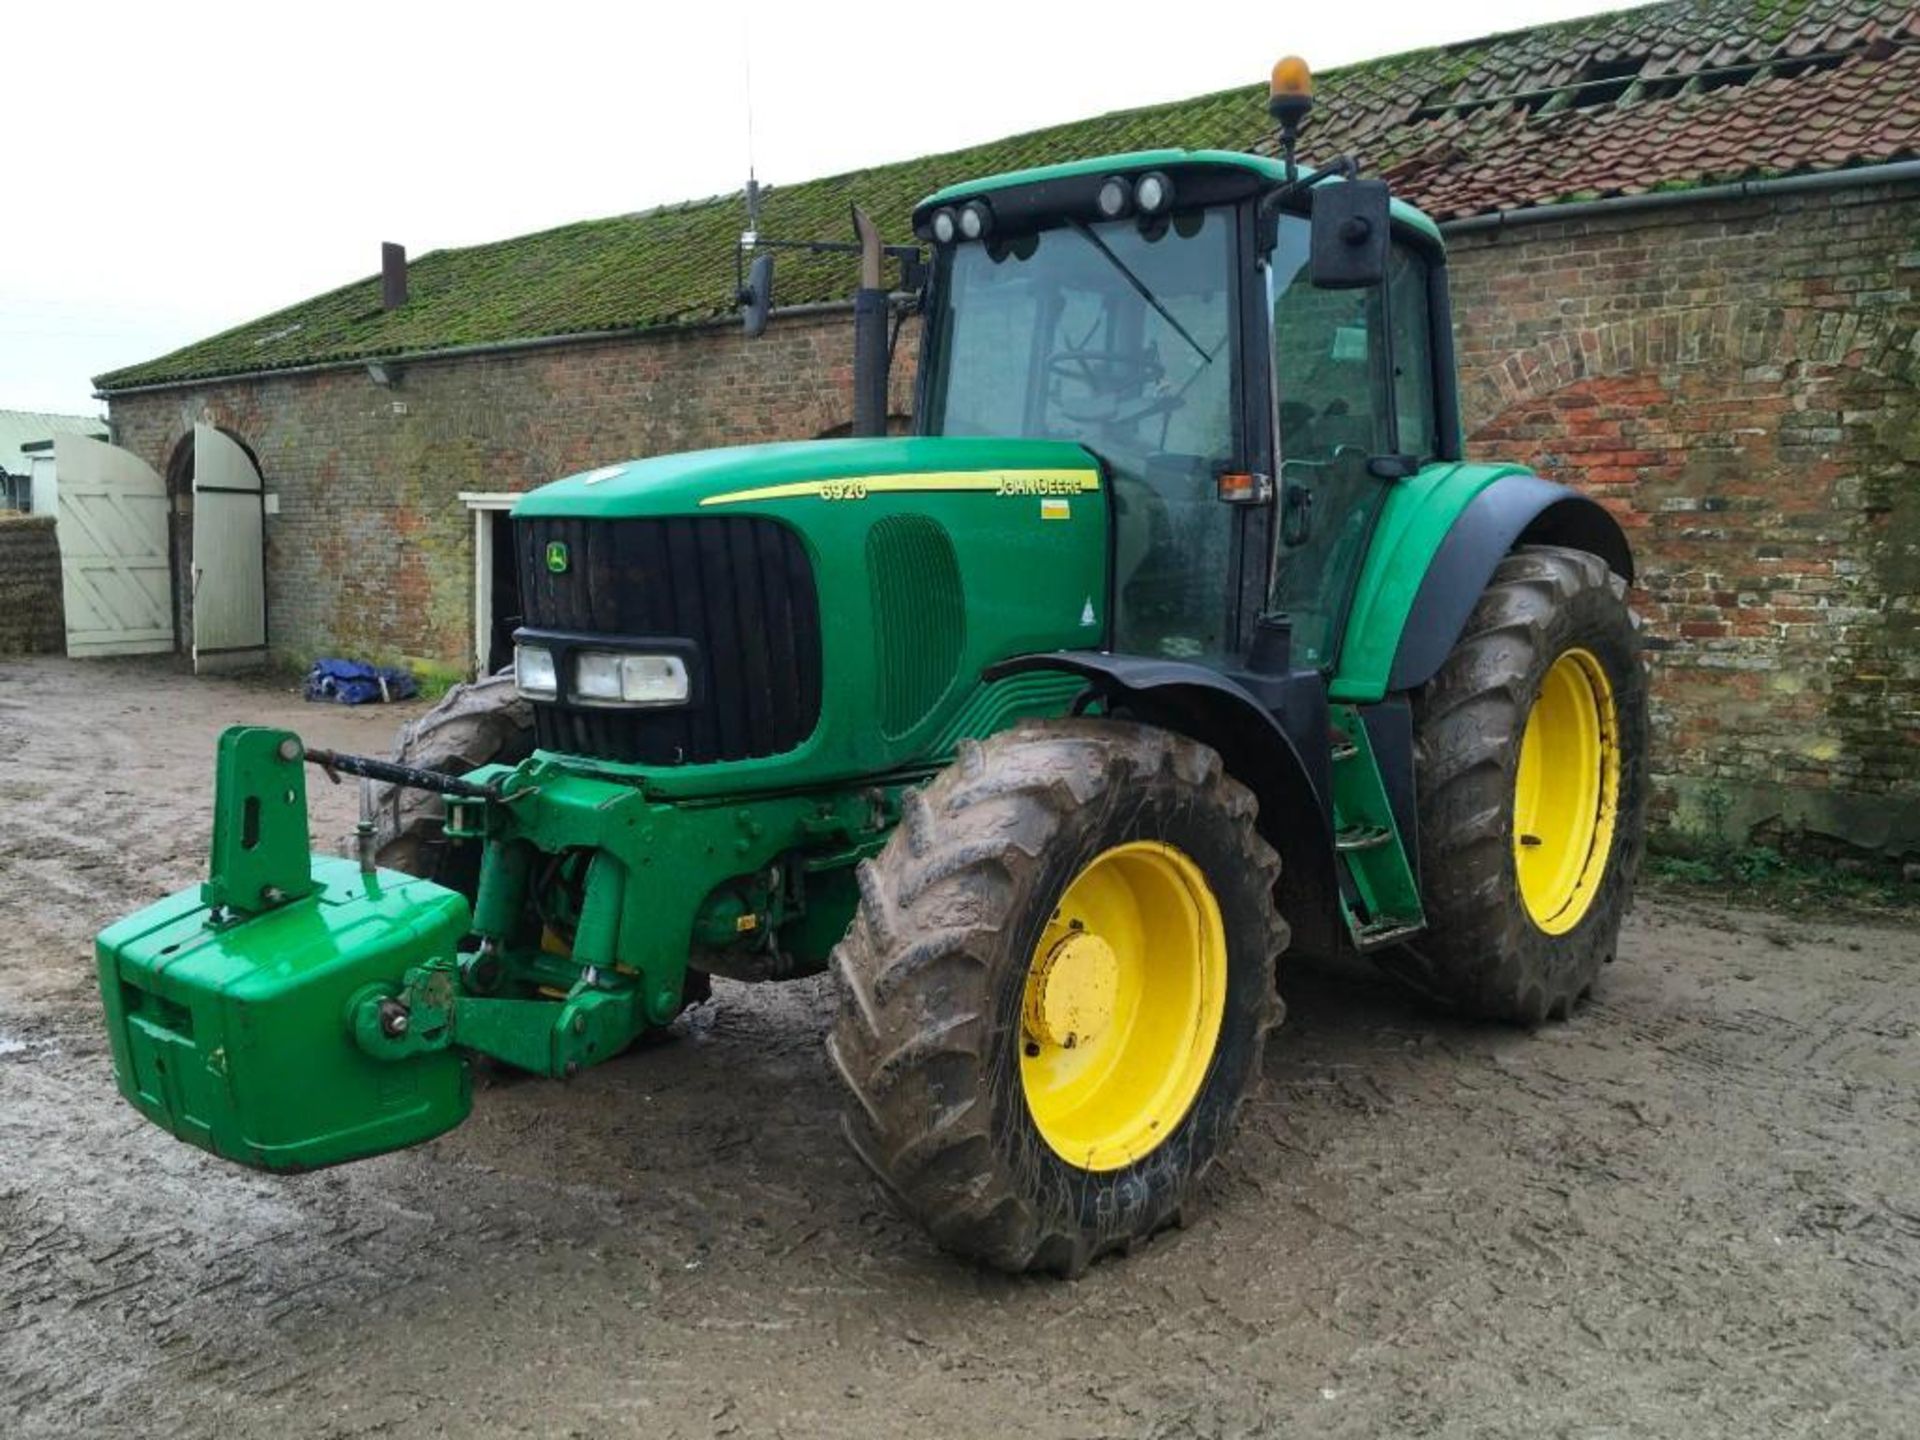 2005 John Deere 6920 40kph tractor with Power Quad gear box, 2 rear spool valves, front and rear lin - Image 5 of 9